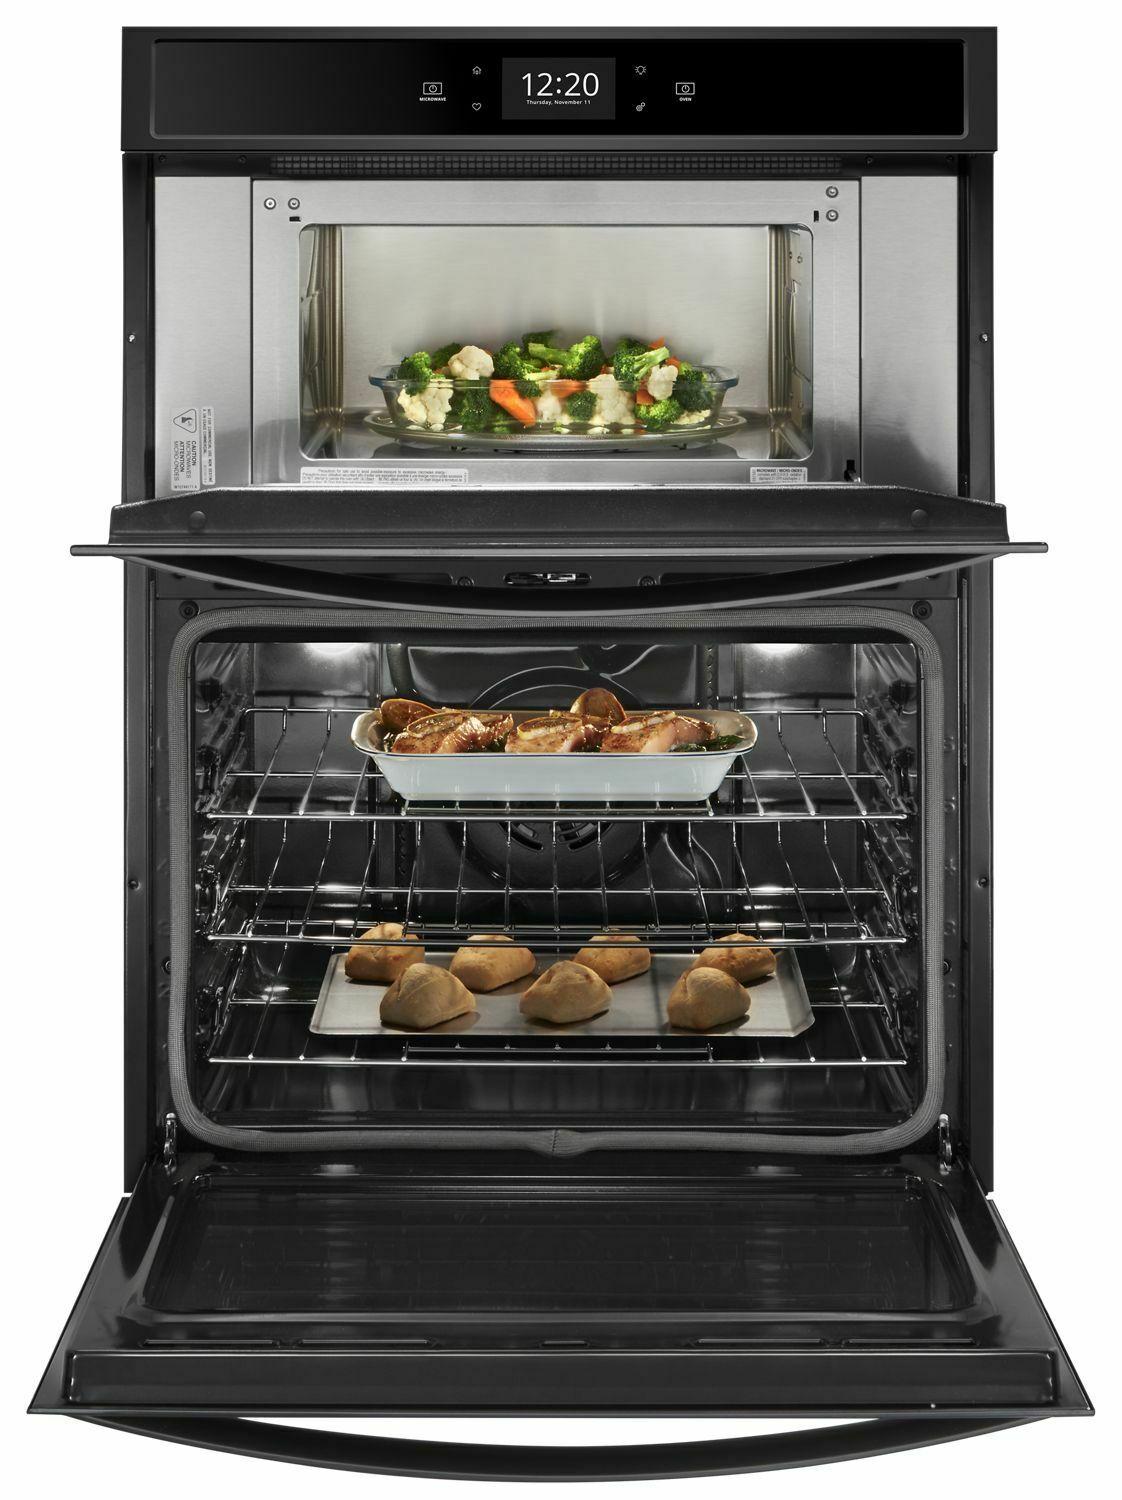 Whirlpool 6.4 cu. ft. Smart Combination Wall Oven with Touchscreen - Black